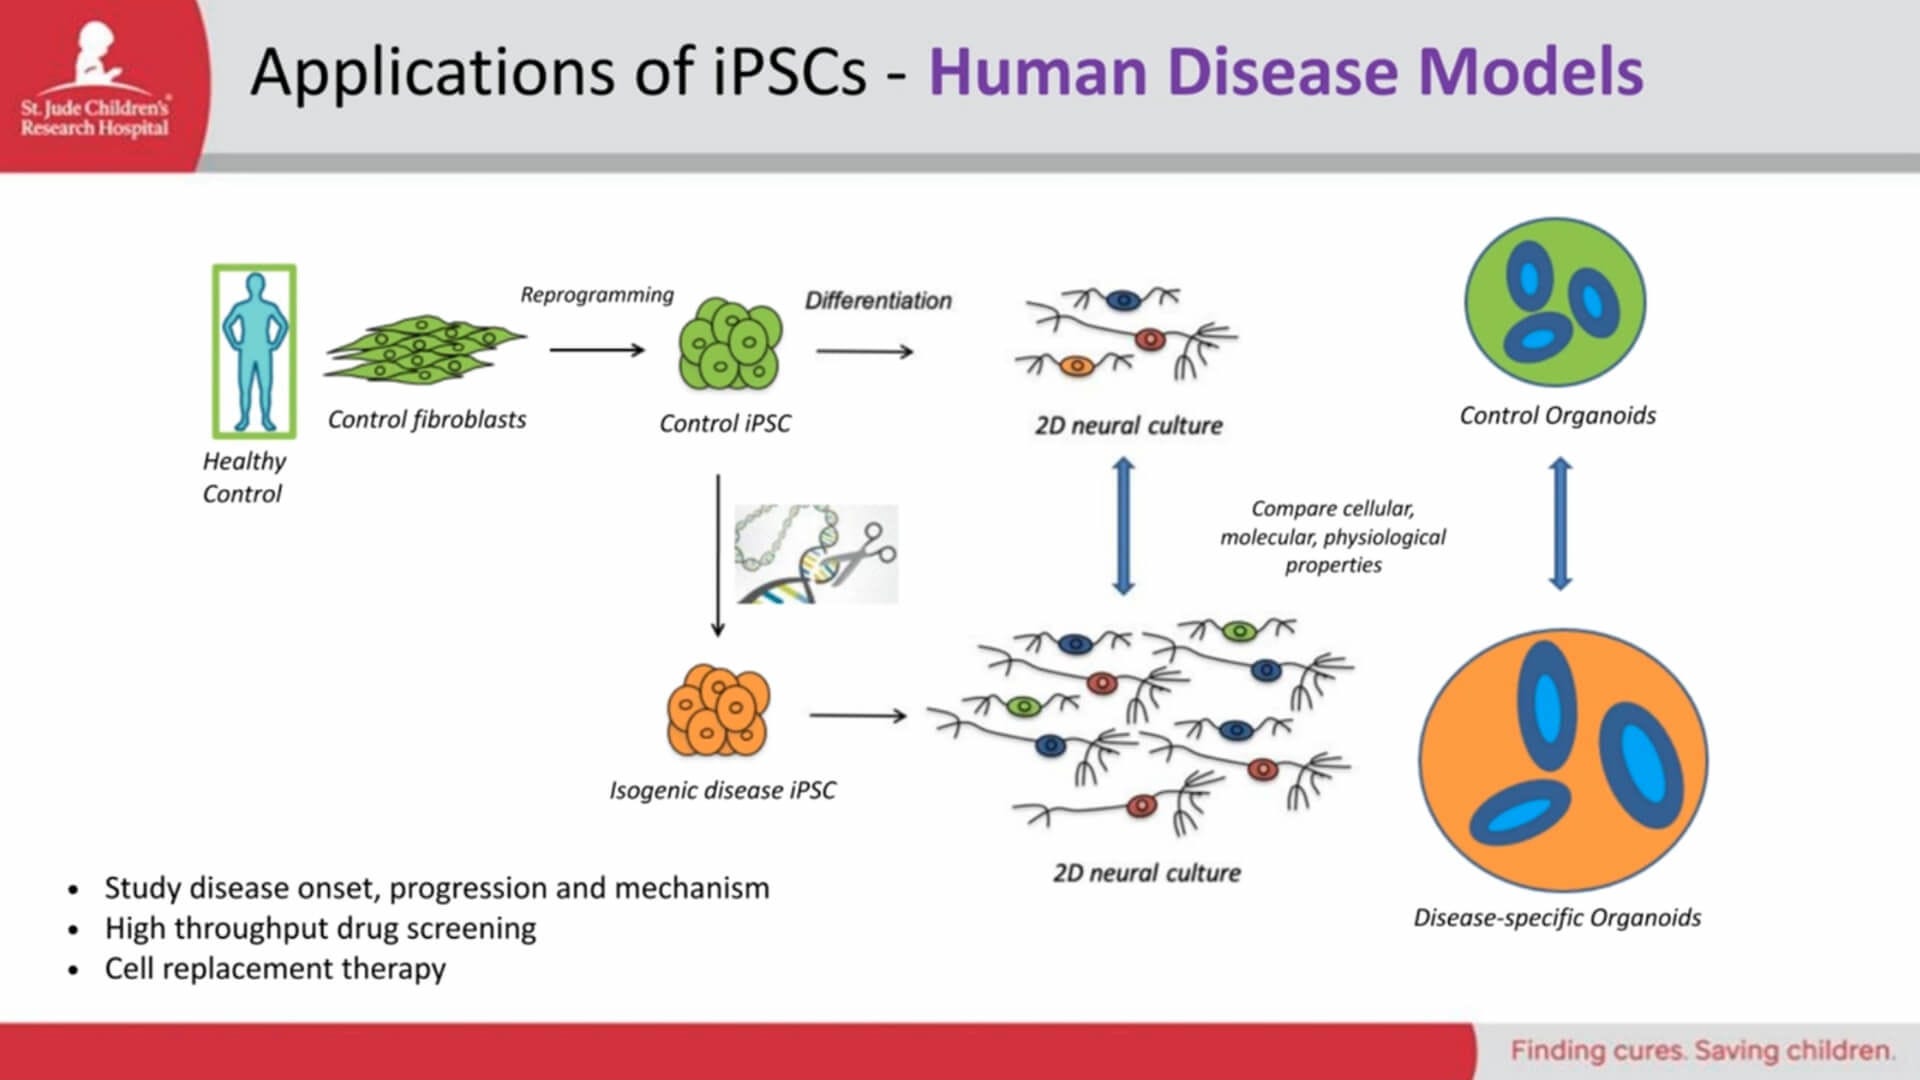 iPSCs As Models, Part 2: Modeling the Human Brain with Organoids